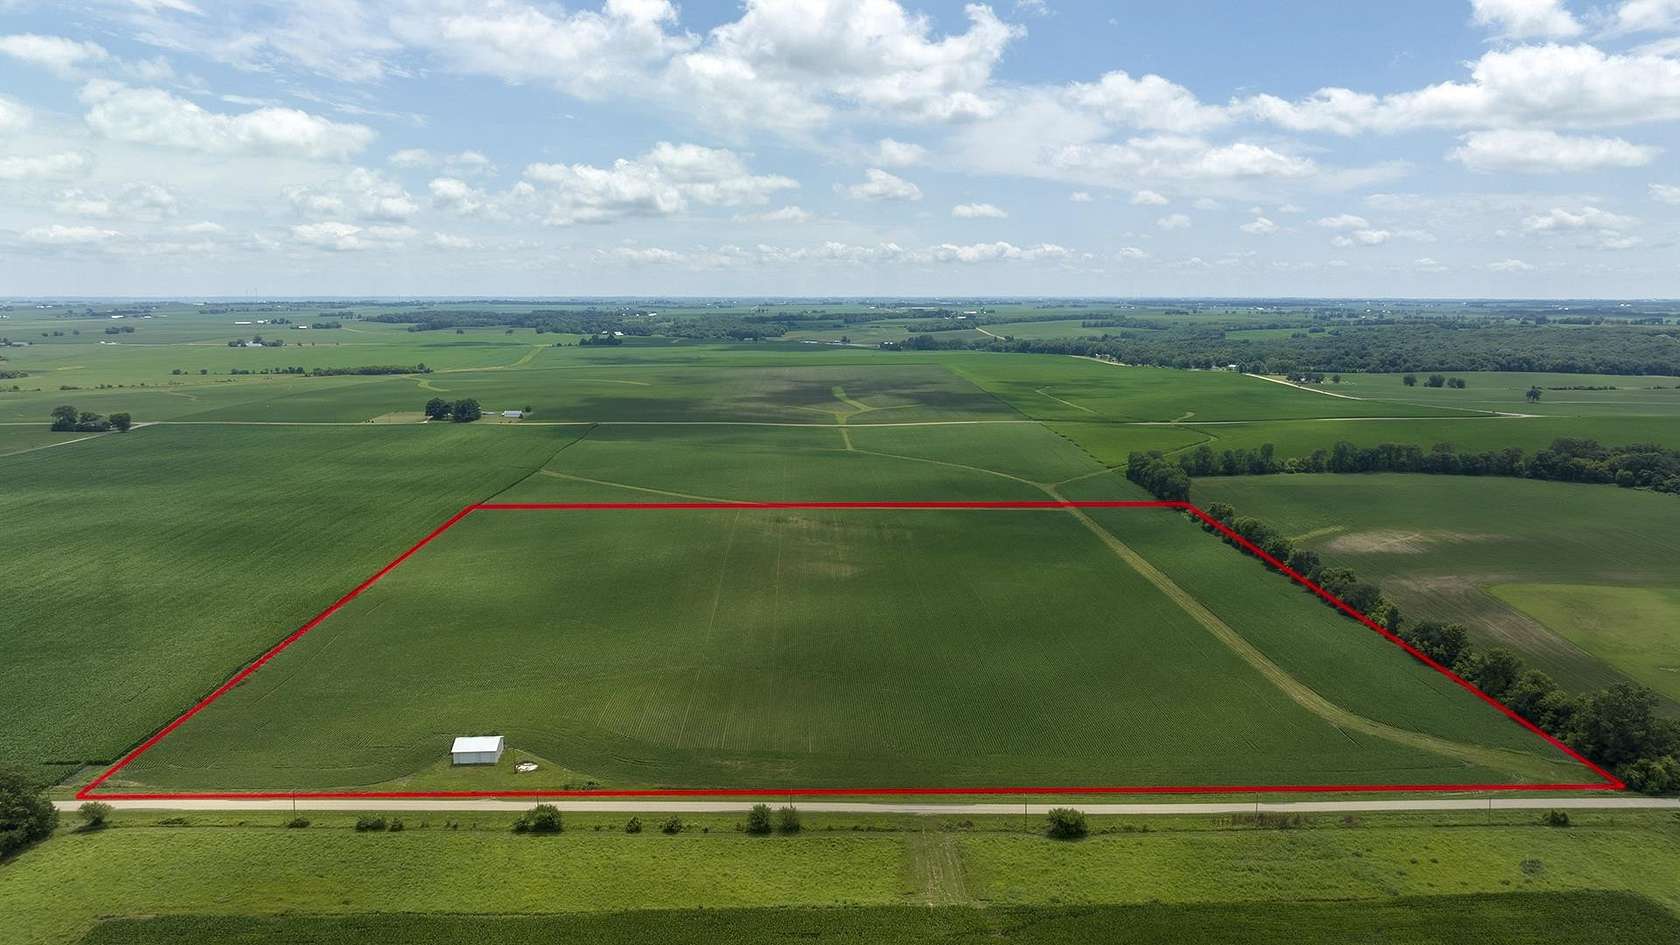 40 Acres of Agricultural Land for Sale in Chana, Illinois